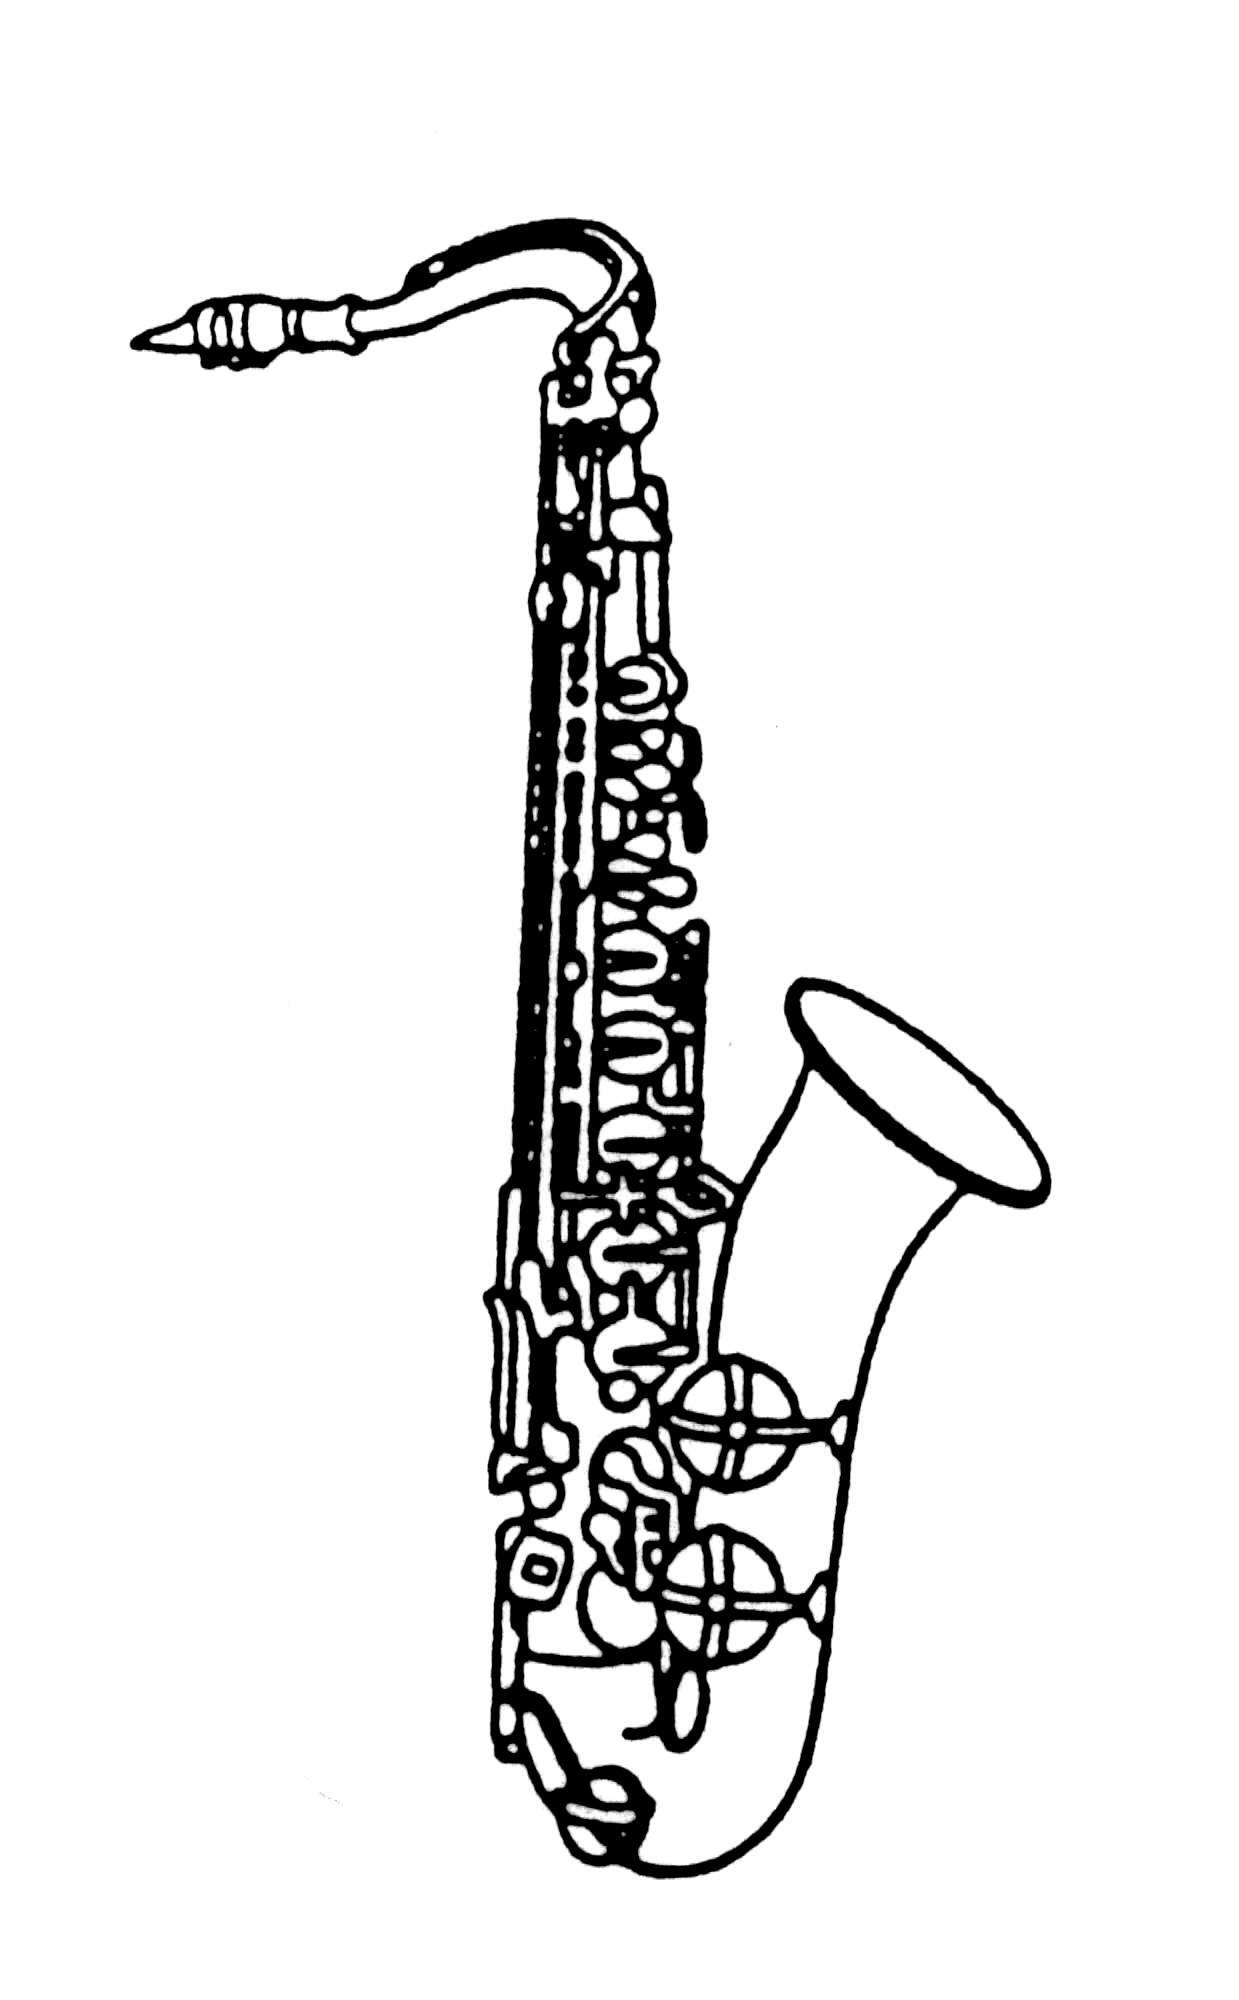 Oboe   The Orchestra Tunes To This Instrument  It Has A Nasal